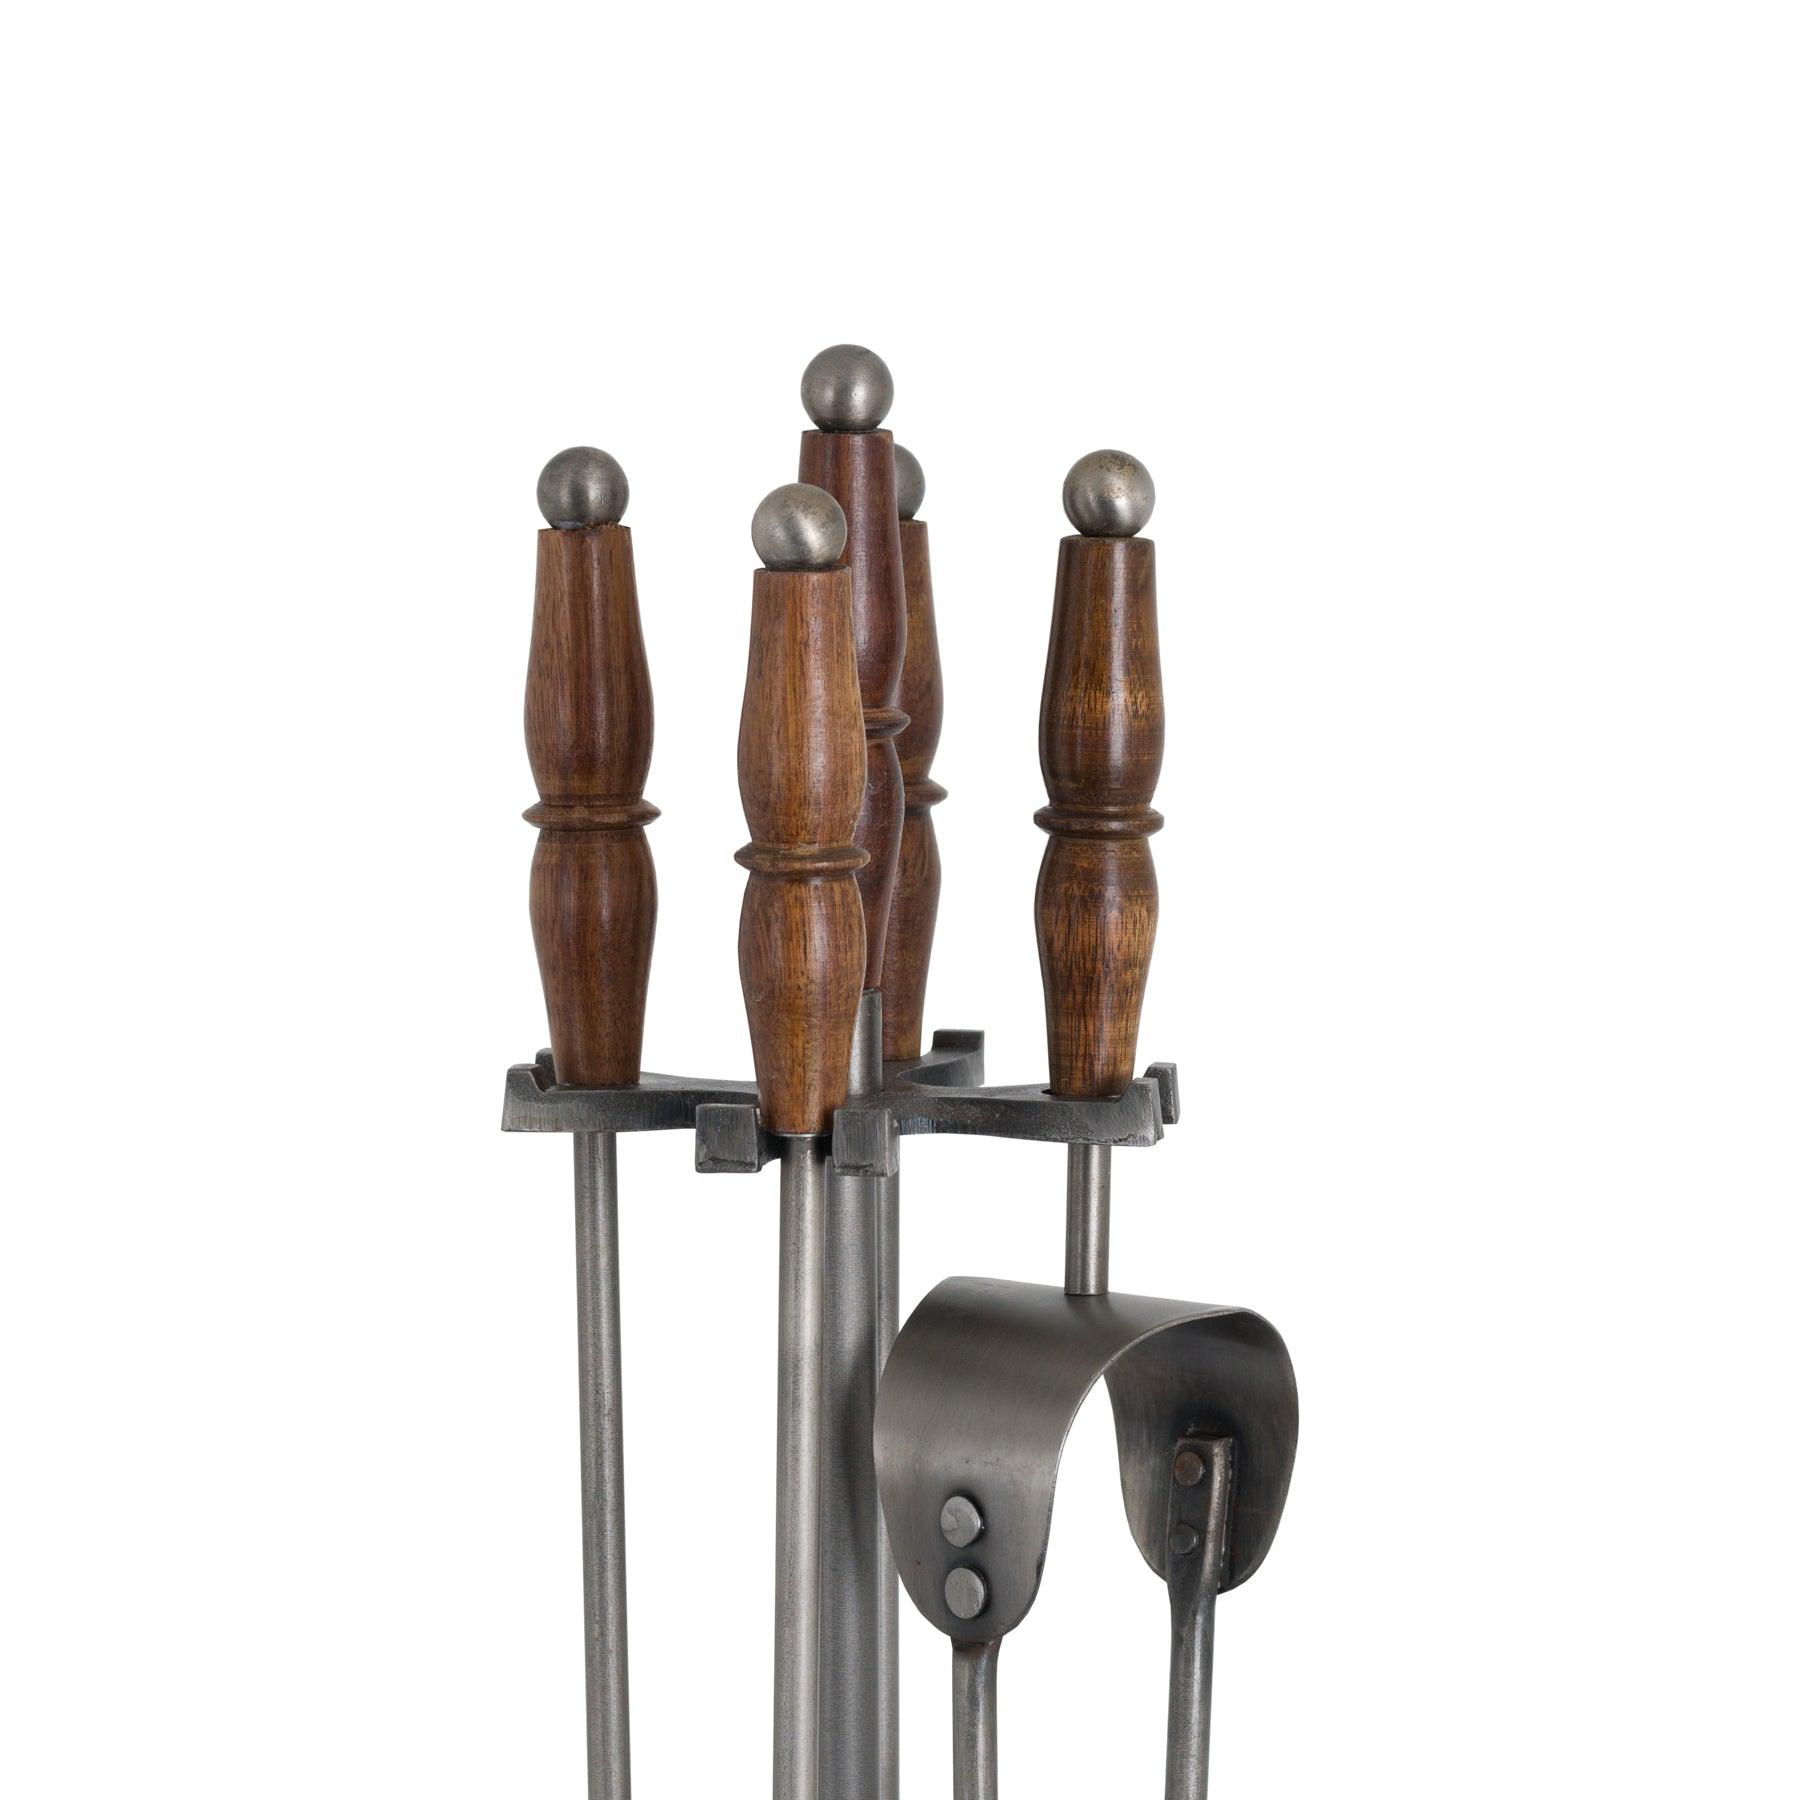 Hand Turned Fire Companion Set In Antique Pewter With Wooden Handles - Vookoo Lifestyle